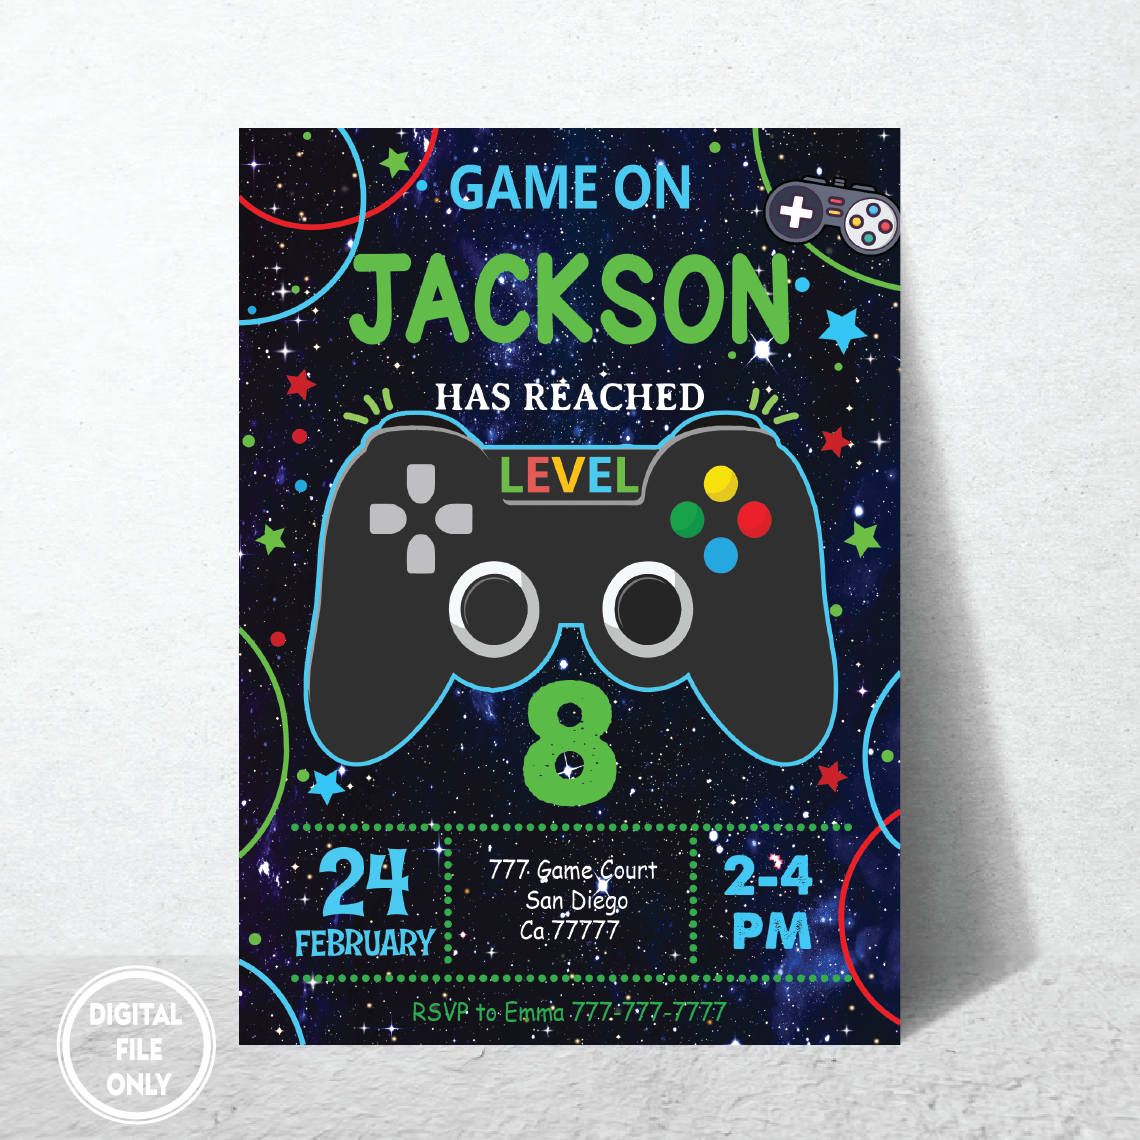 Personalized File Video Games Invitation PNG File Only, Video Games Invites Birthday Boy girl Png, Instant Download Video Games Invitations